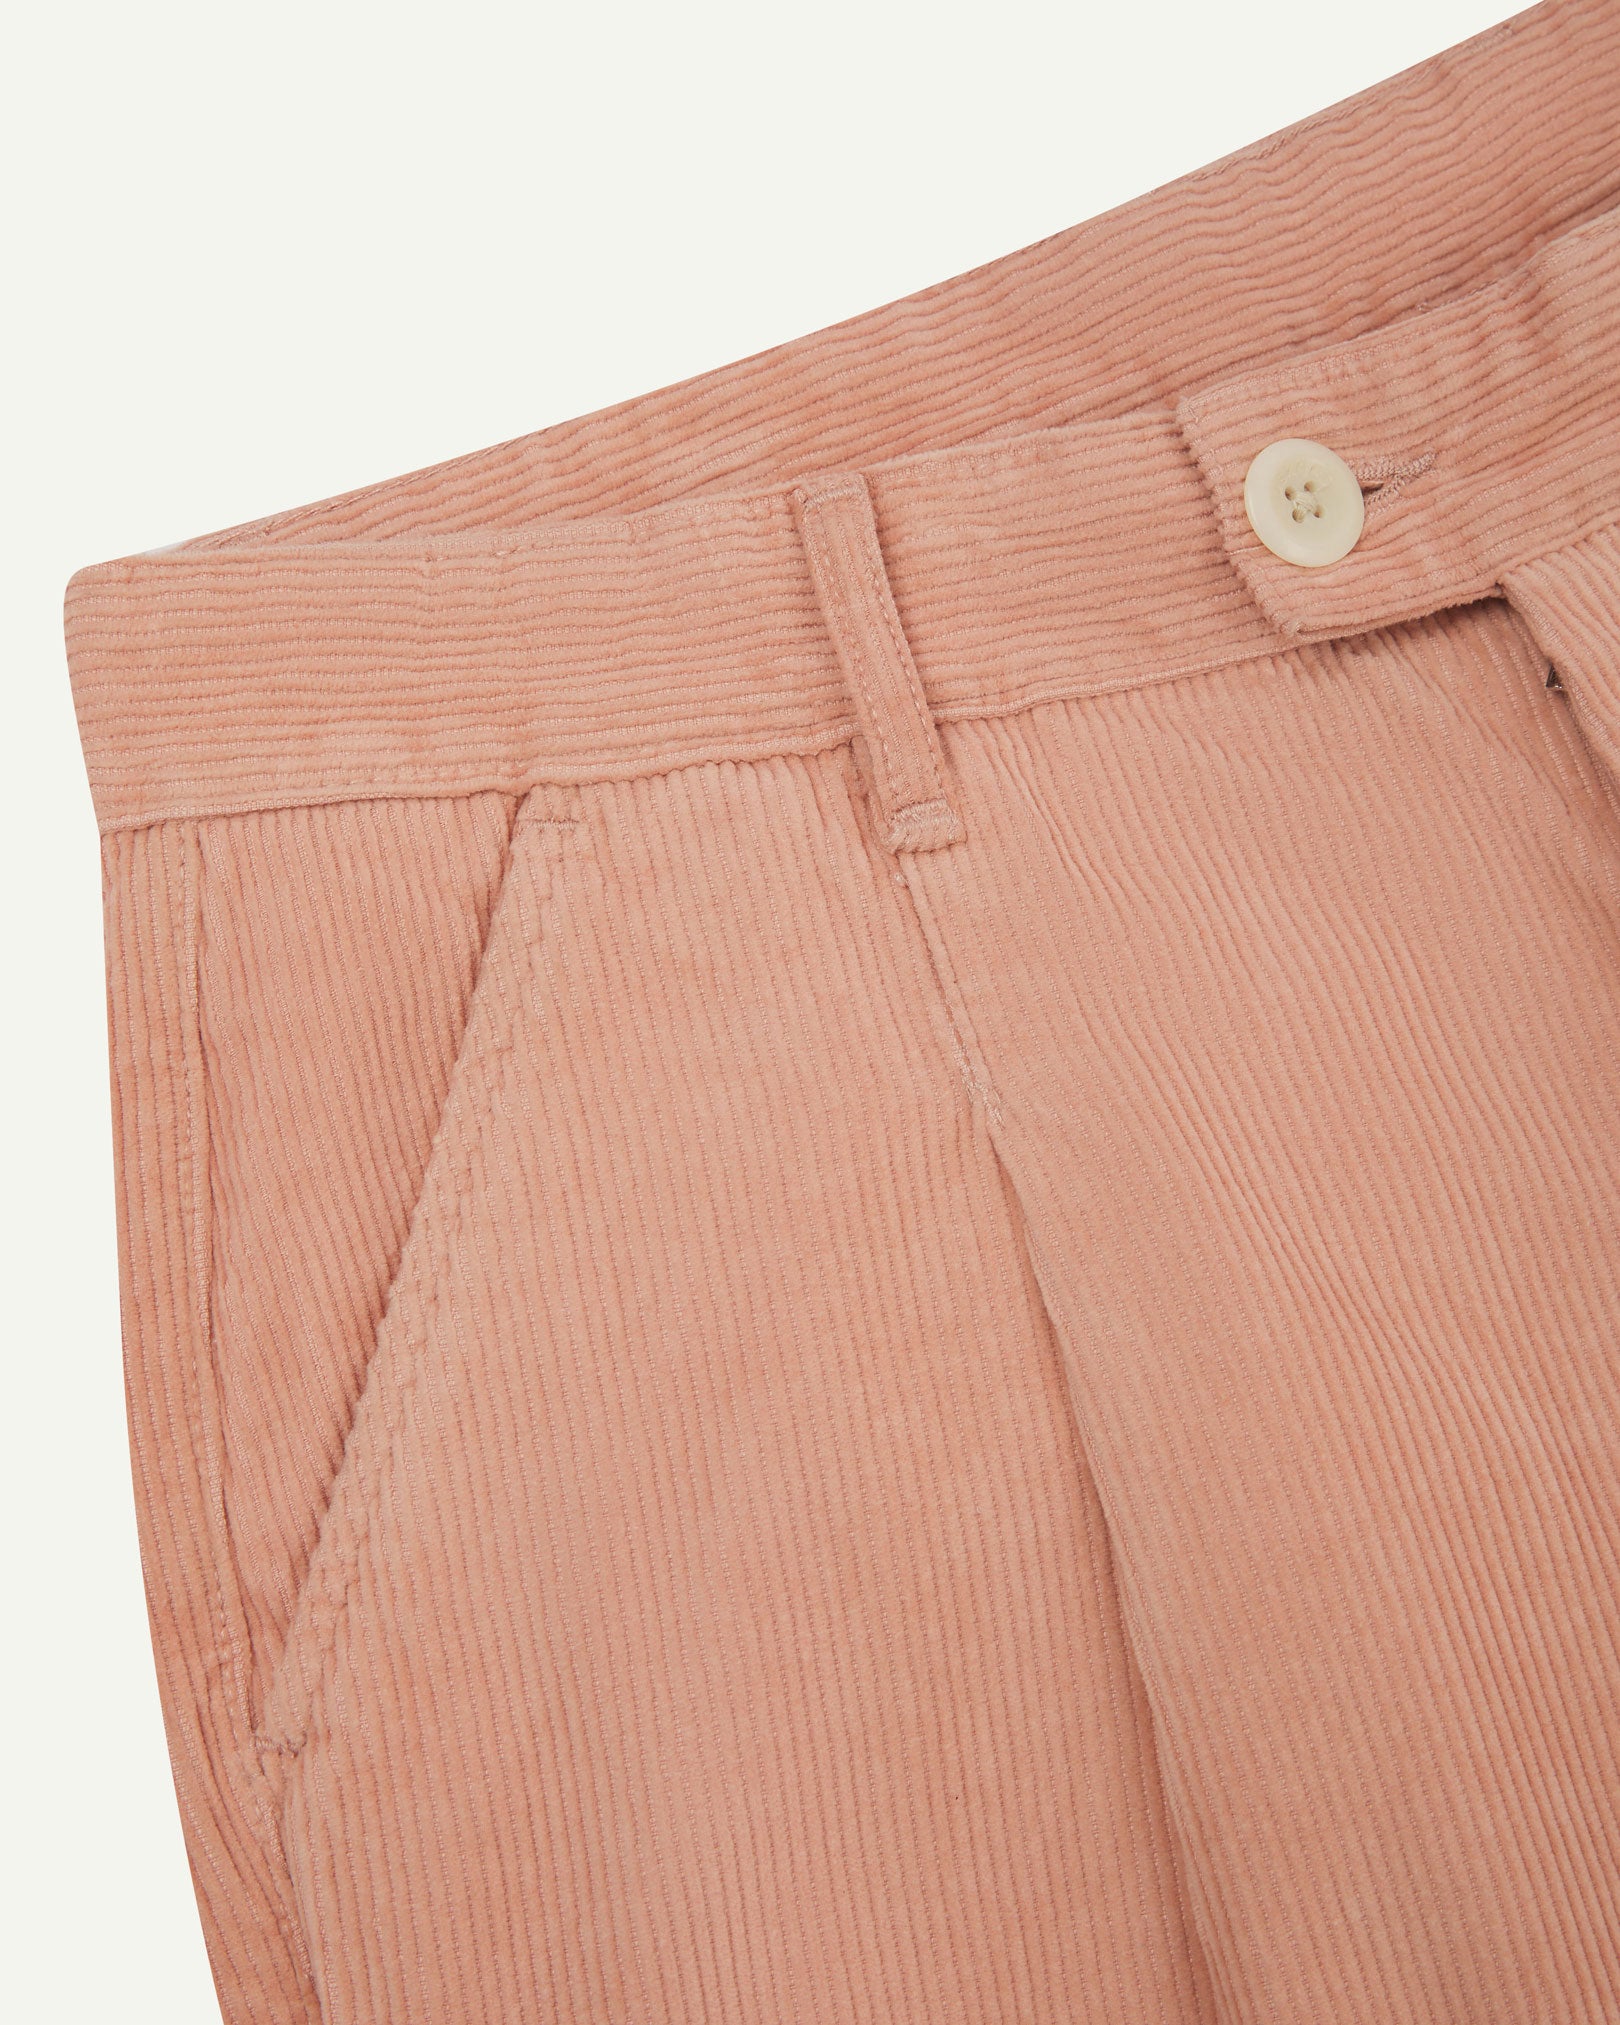 Close up of waist area of Uskees cord boat pants in dusty pink. Clear view of front pocket, belt loops and Corozo button fastening.